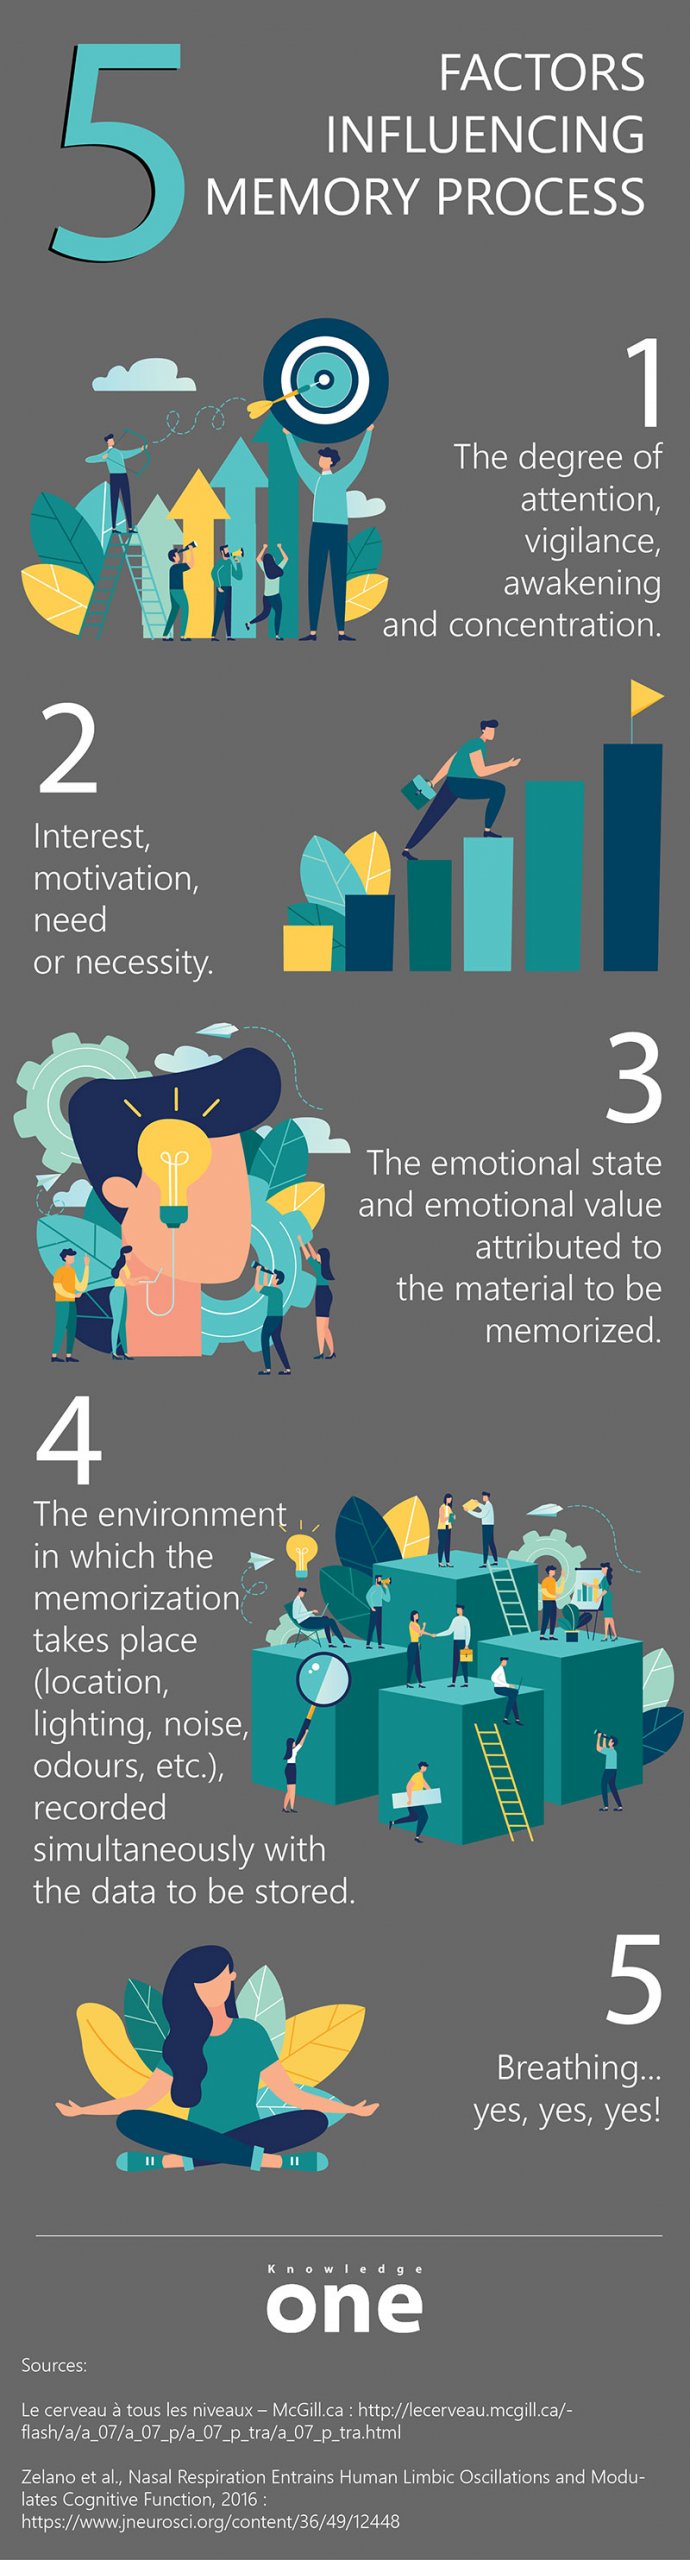 How to Improve Memory: 11 Ways to Increase Memory Power